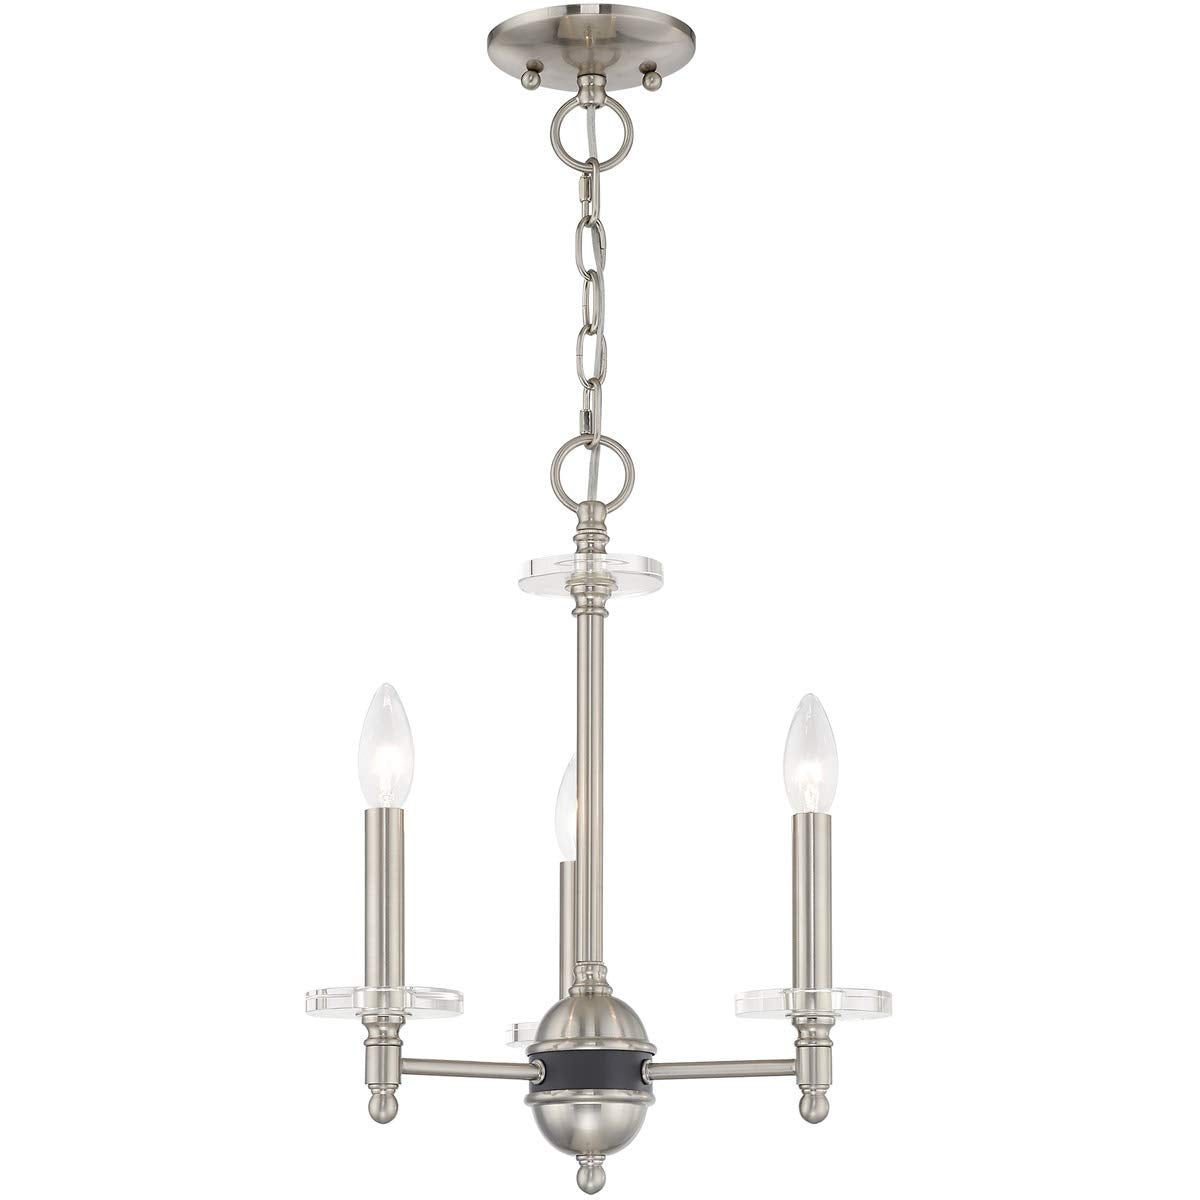 Livex Lighting 42703-91 Bancroft - Three Light Mini Chandelier, Brushed Nickel Finish with Clear Bobeche Crystal